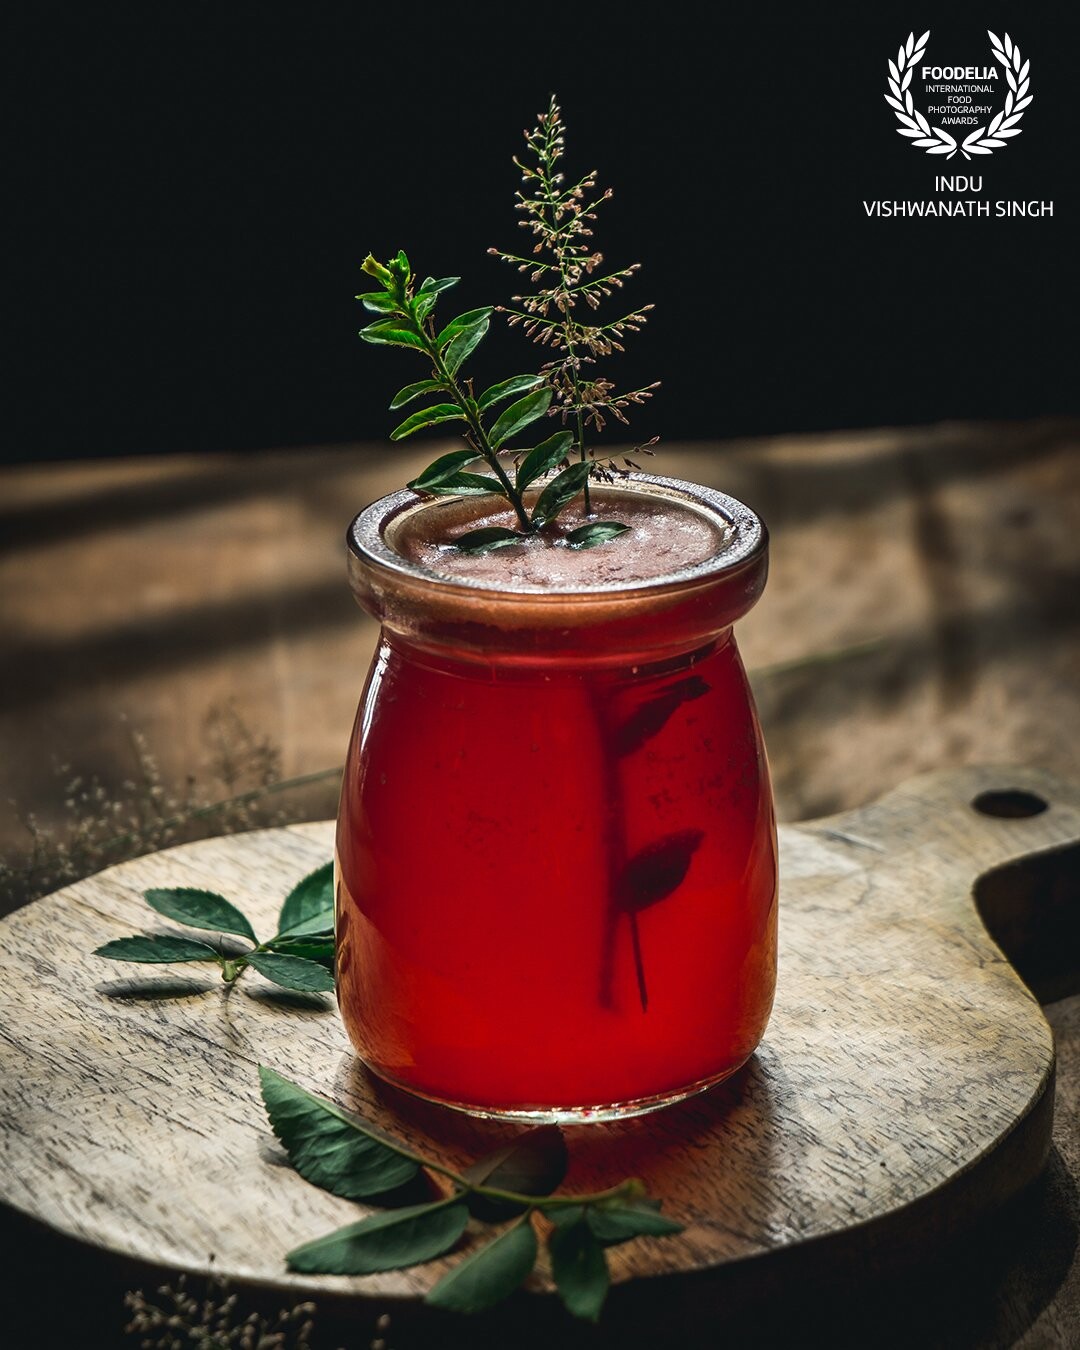 Hibiscus Tea shot. Play of shadows and highlights play a major role in shaping my photos. This was a simple setup and was created to make an impact.